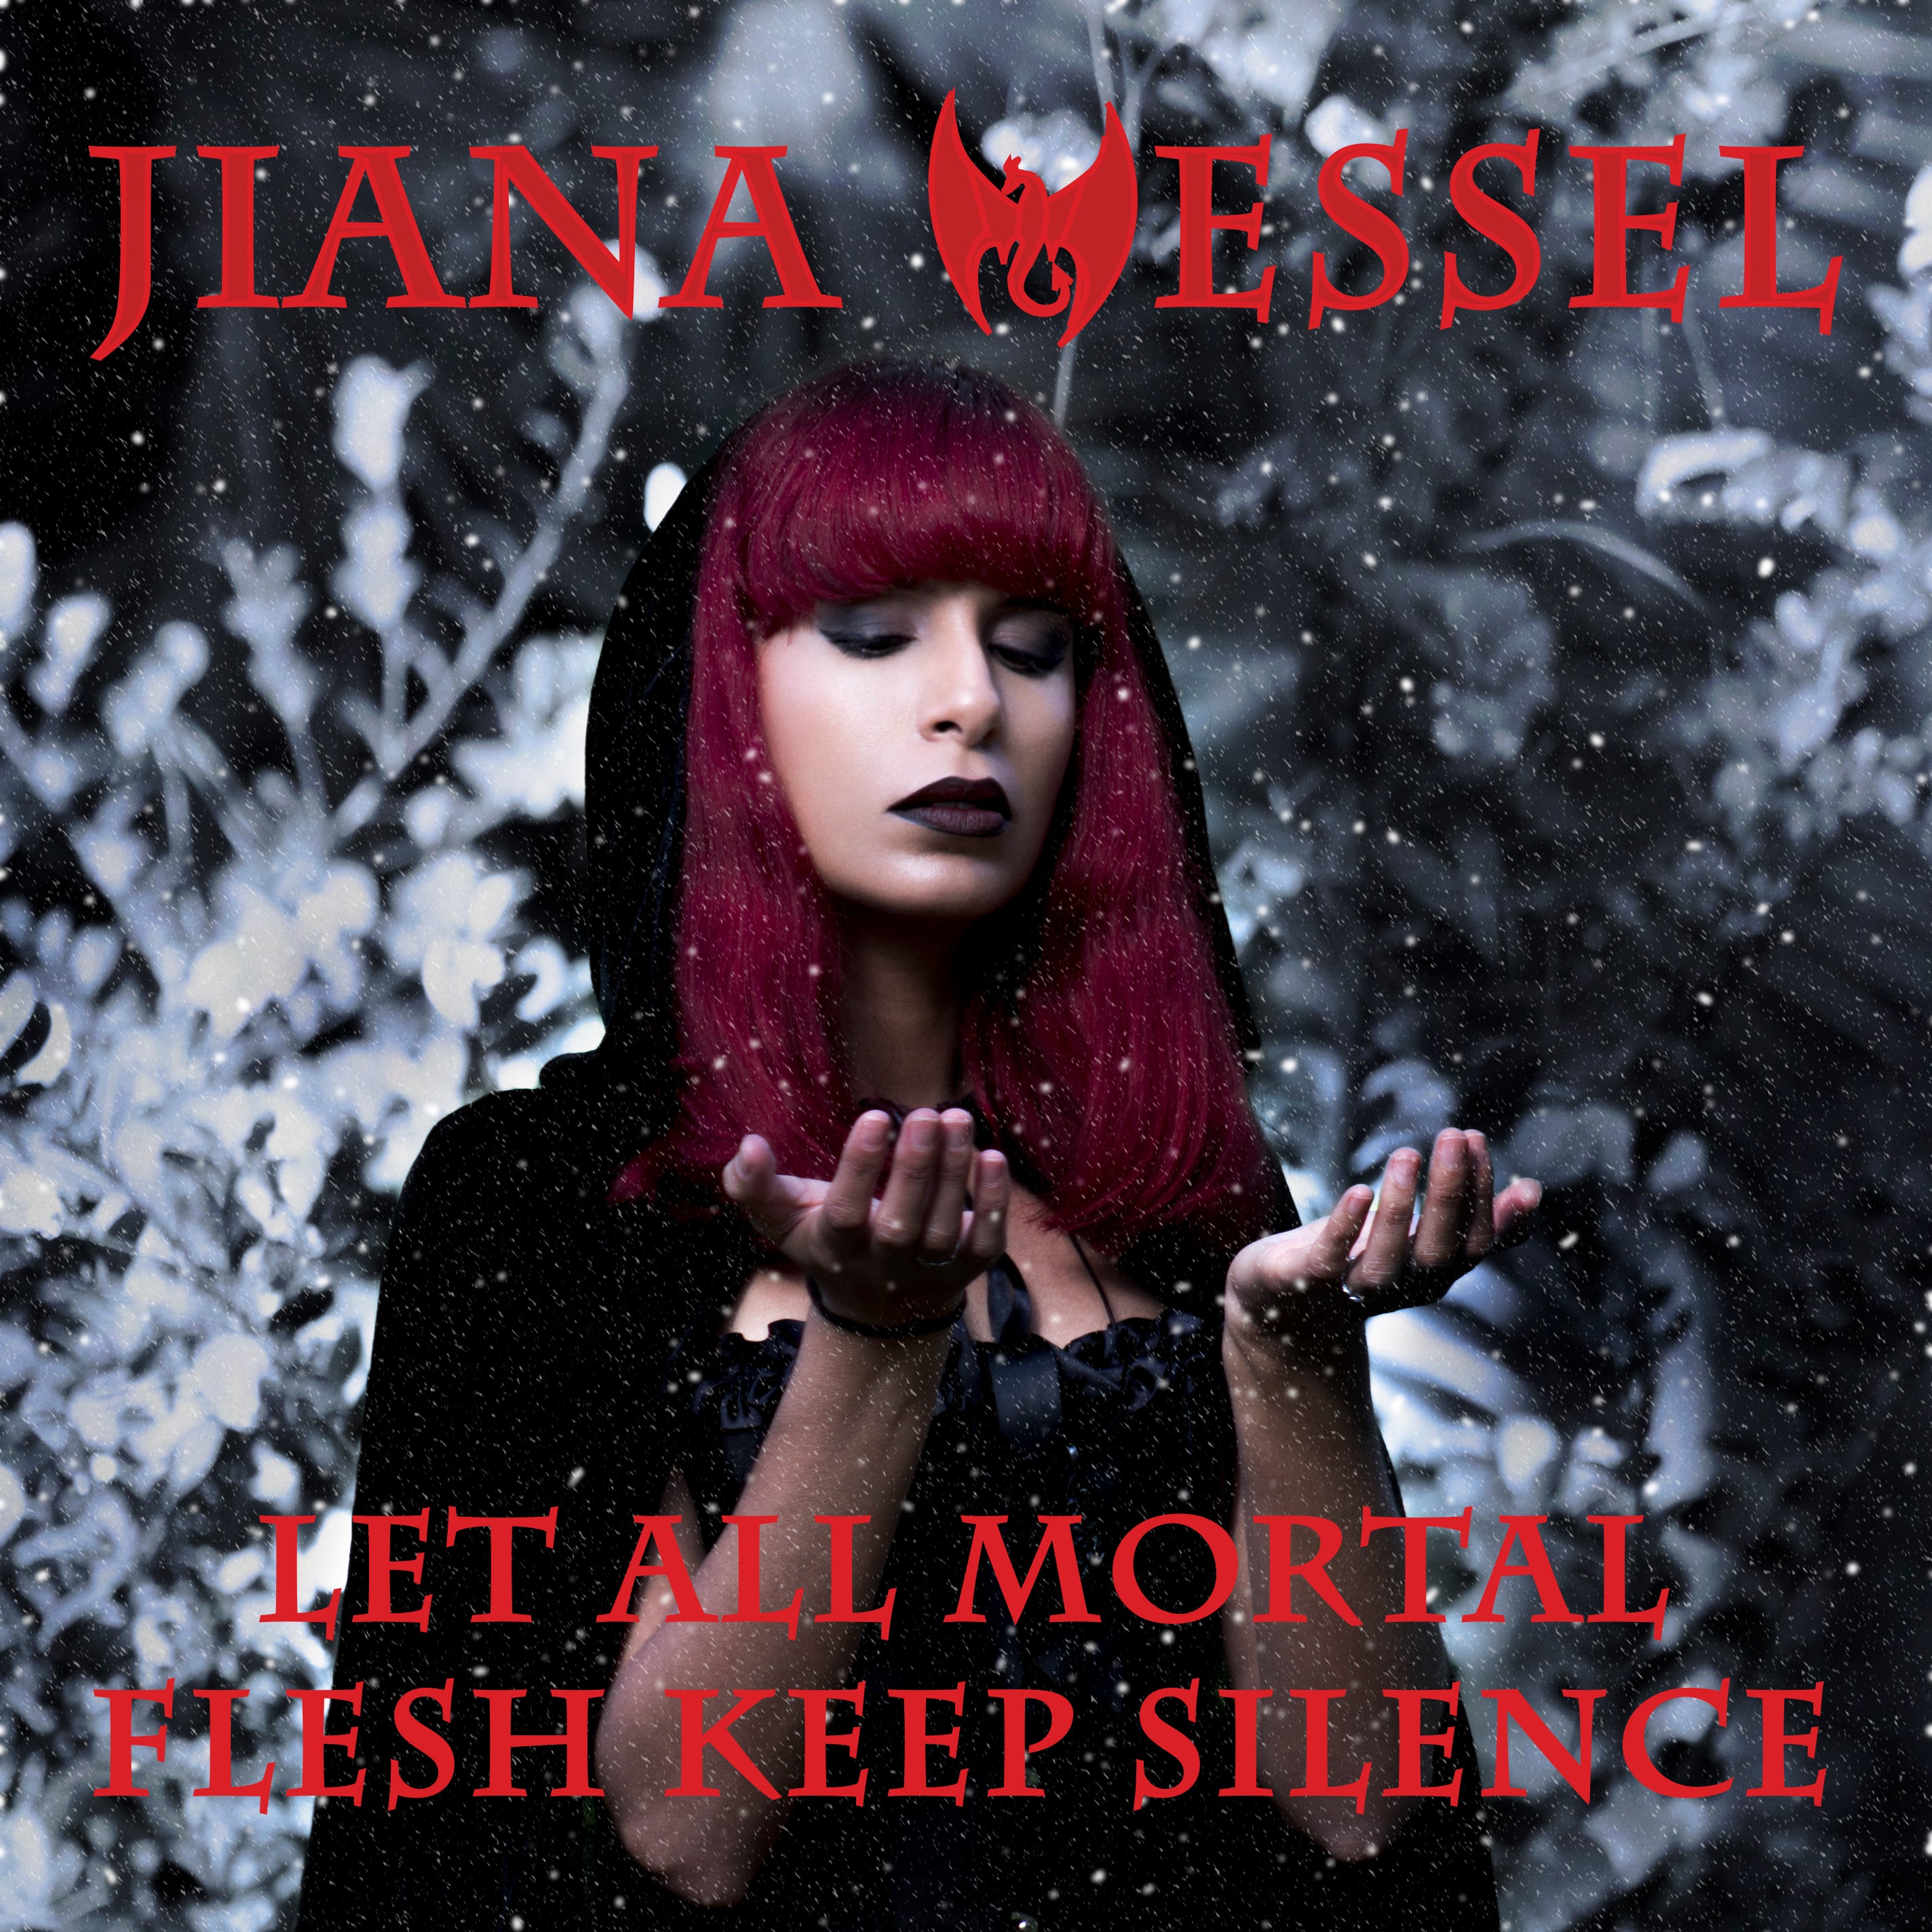 Enjoy a hunting, gothic, operatic metal twist to this Christmas classic! Let all mortal keep silence.